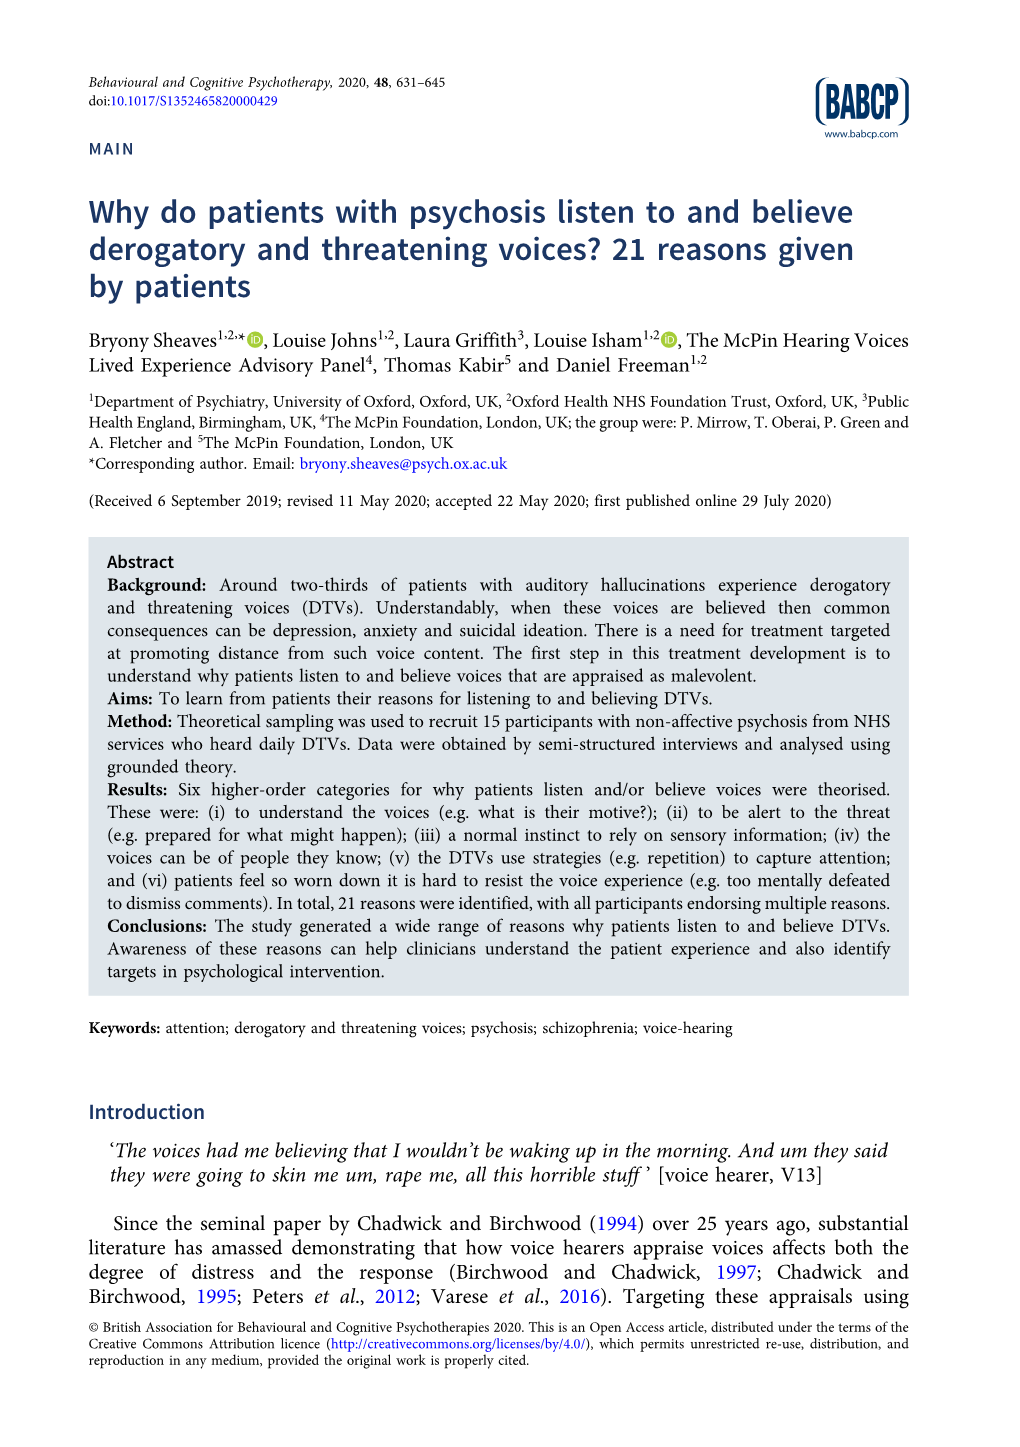 Why Do Patients with Psychosis Listen to and Believe Derogatory and Threatening Voices? 21 Reasons Given by Patients